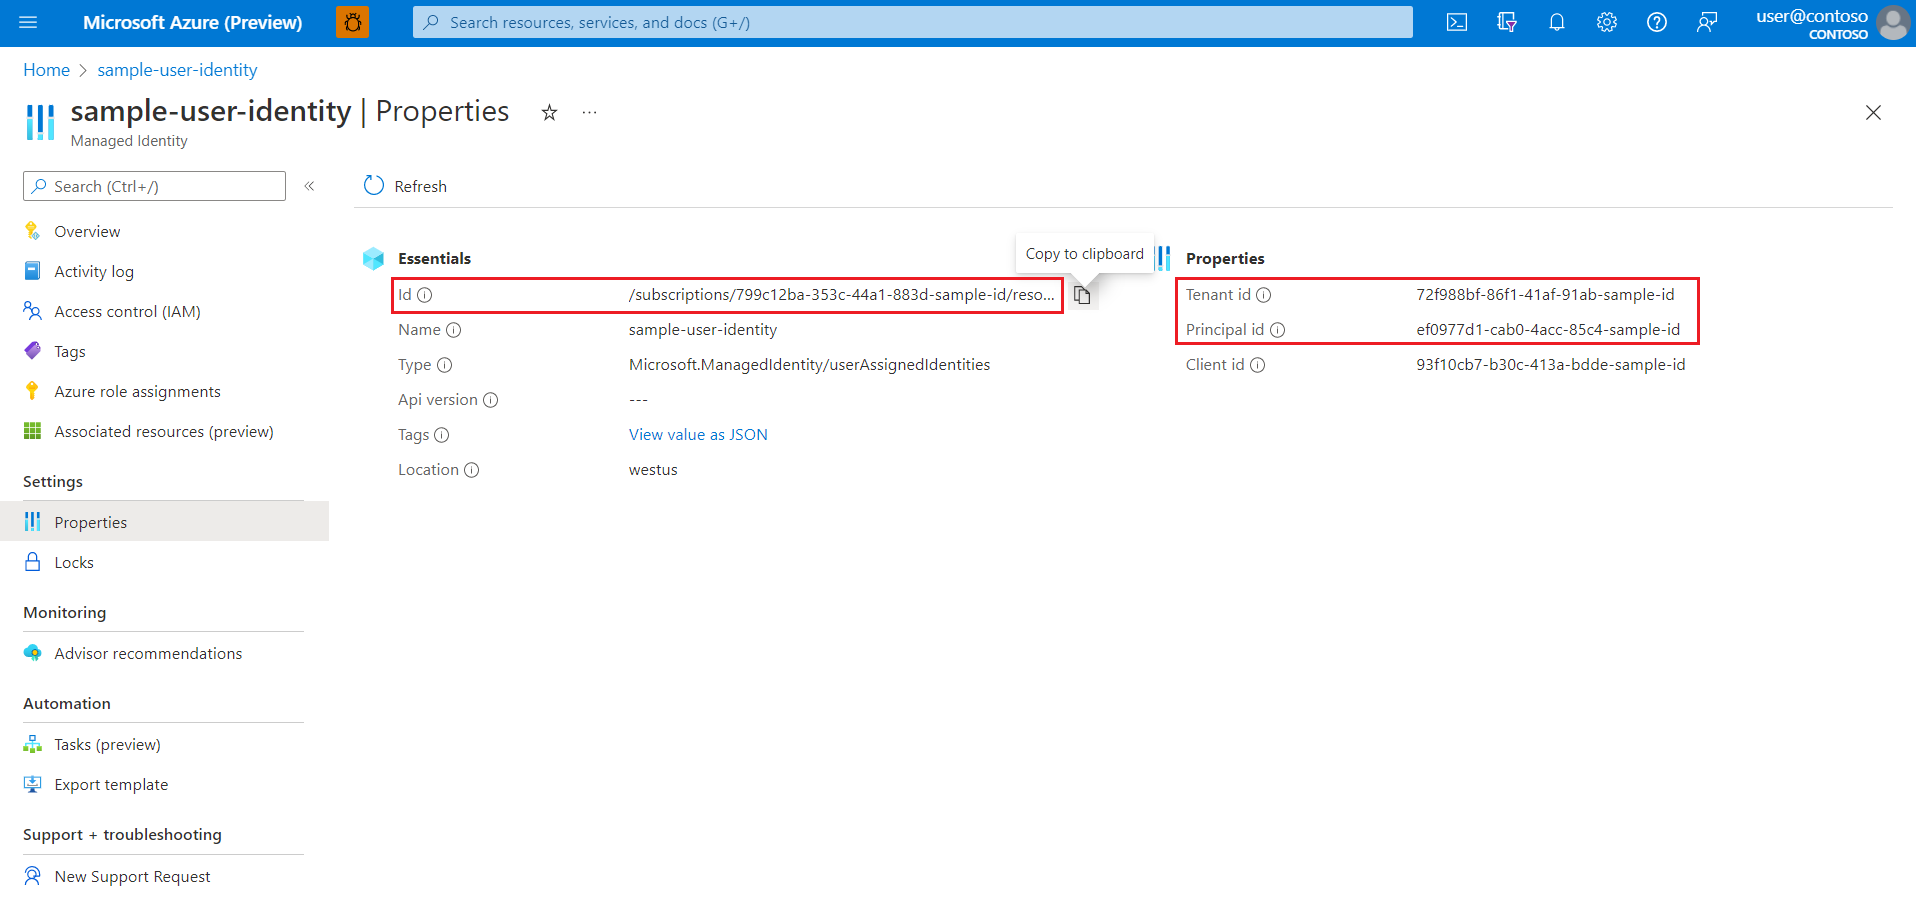 Screenshot of Azure portal showing the Managed Identity Properties screen with 'Resource ID', 'Principle ID' and 'Client ID' highlighted.